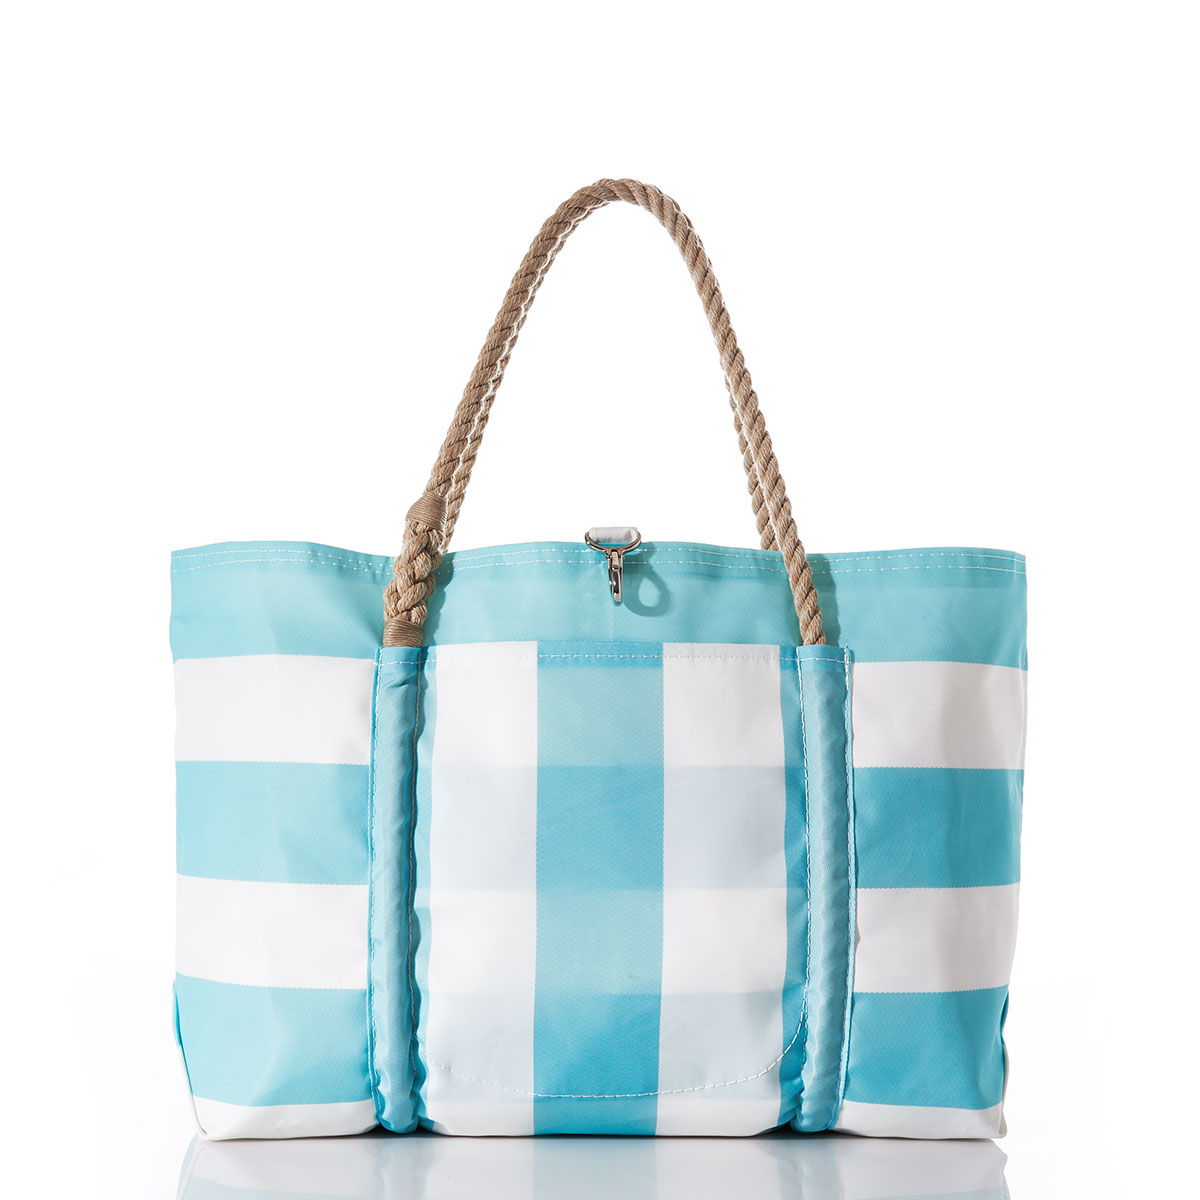 aquamarine and white plaid stripes adorn the front of a recycled sail cloth tote with hemp rope handles and a top metal clasp